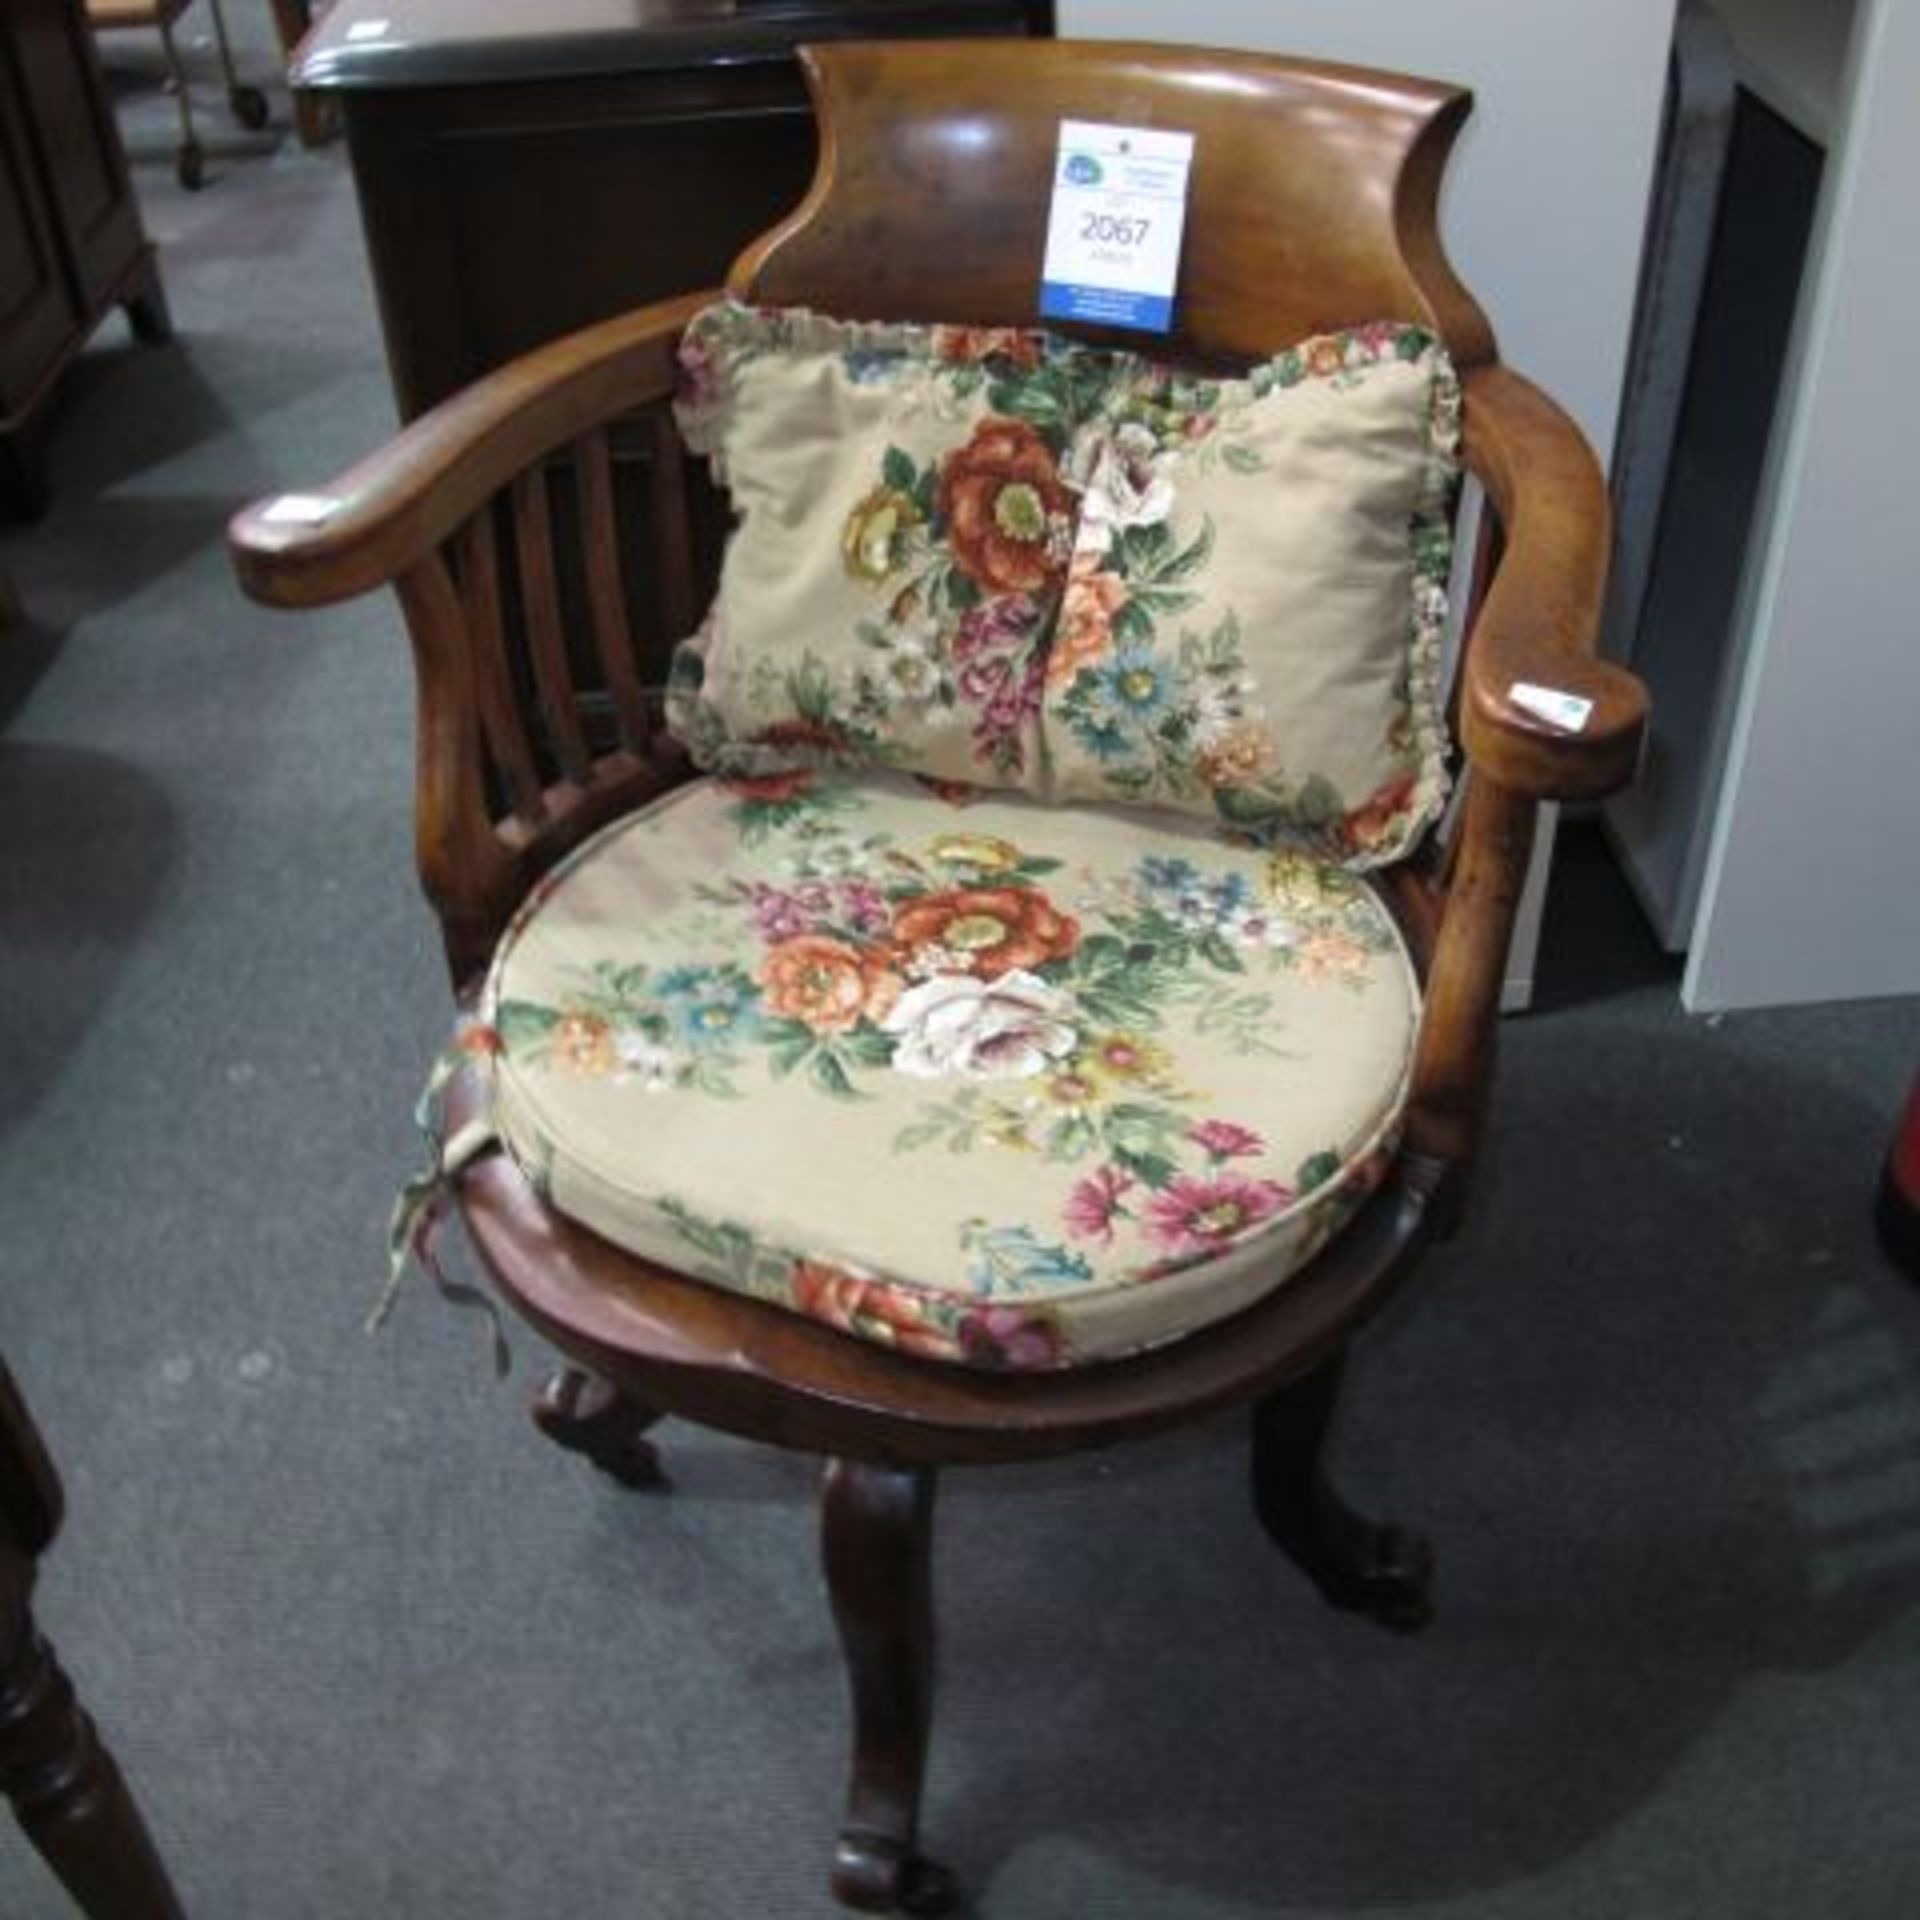 A Swivel Mahogany Captains Chairs with fabric covered Cushions and Castors (est. £50-£80)